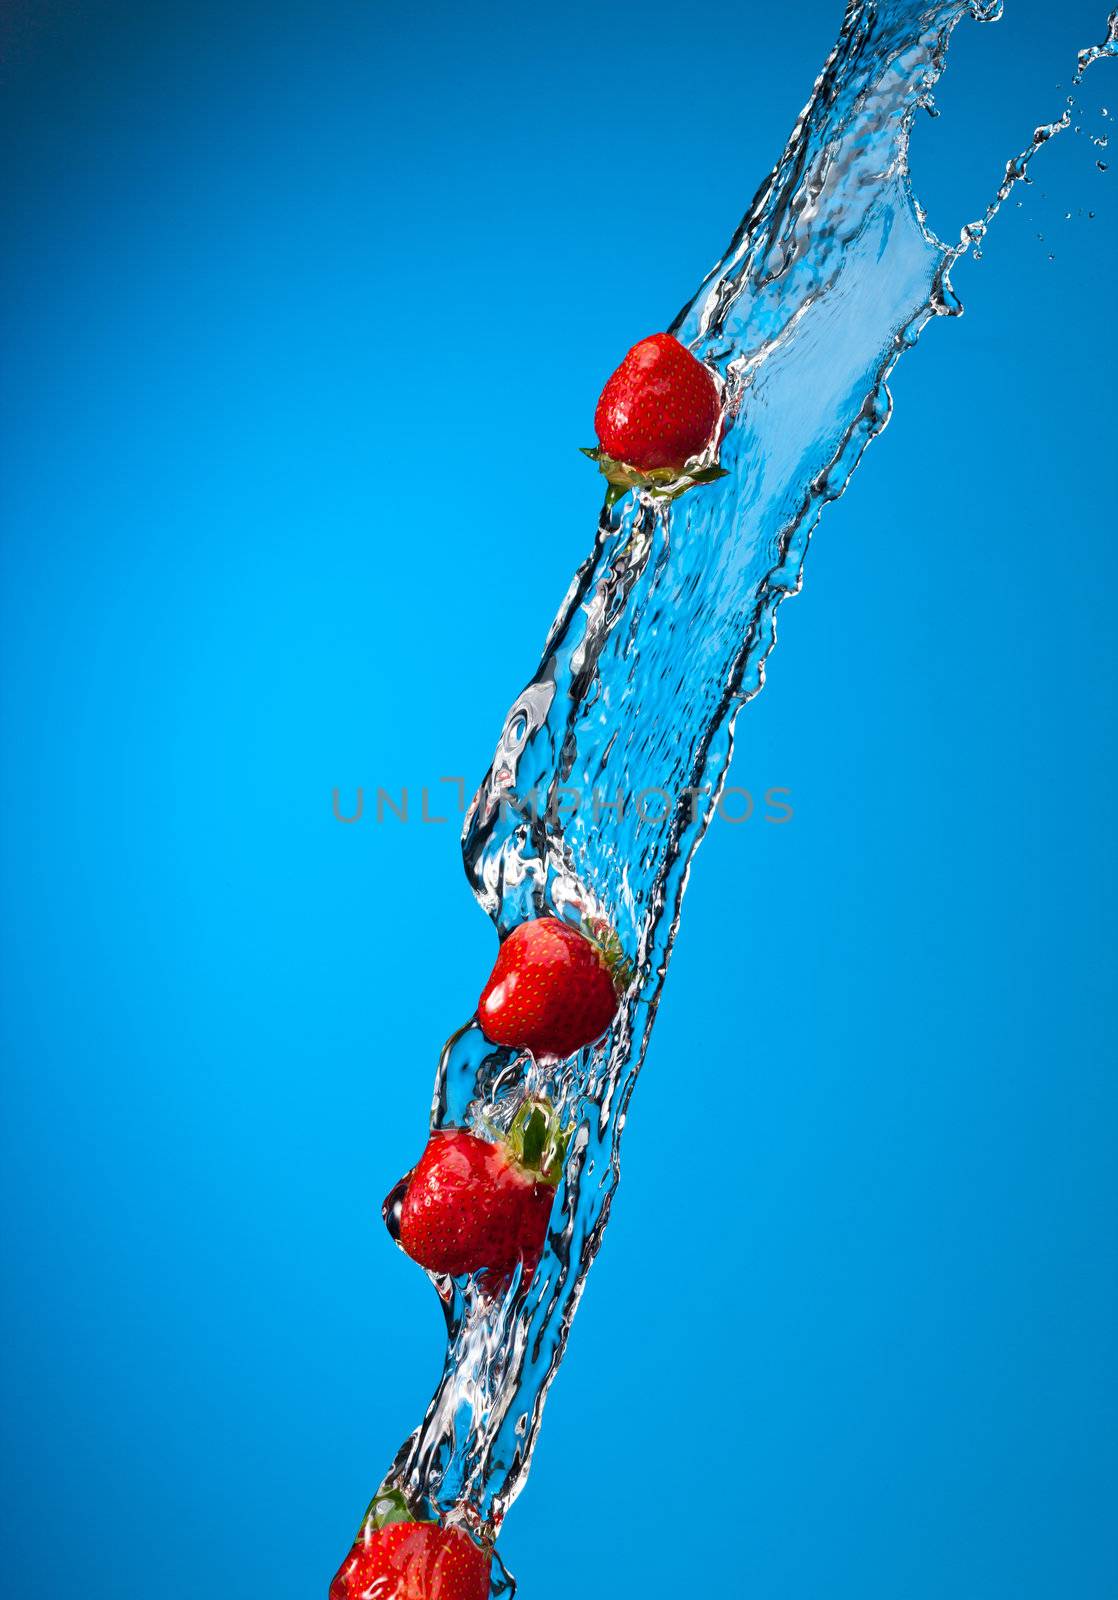 water splash with ripe red strawberry over blue background